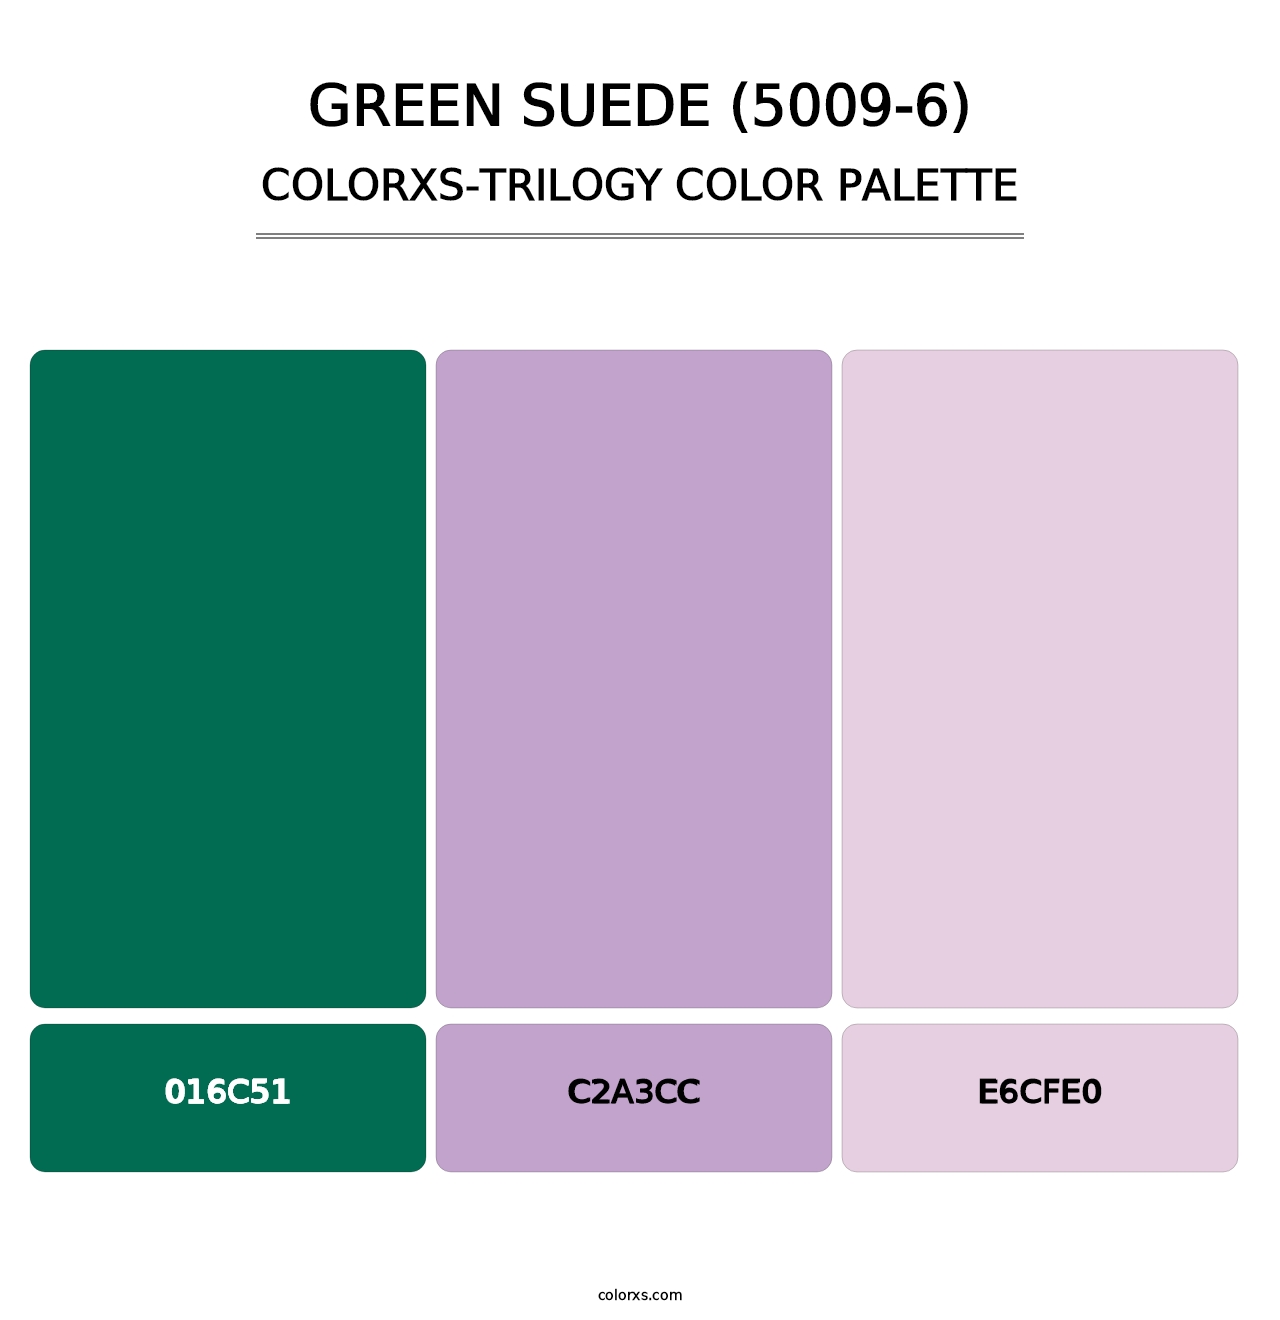 Green Suede (5009-6) - Colorxs Trilogy Palette